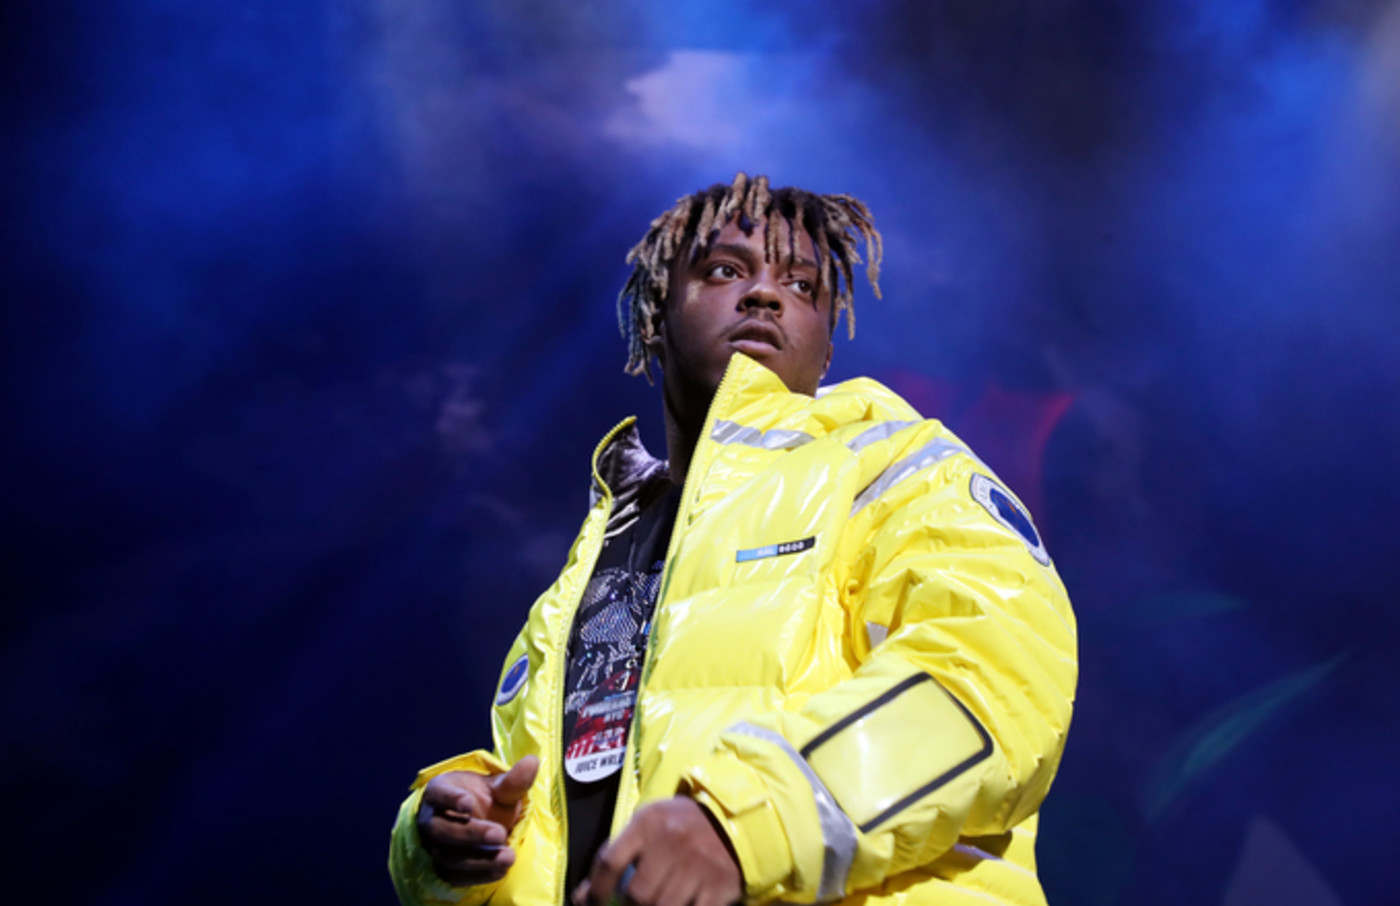 Listen To Yacht Club Feat Juice Wrld By Lil Yachty On Music Blobs Lil Yacht...